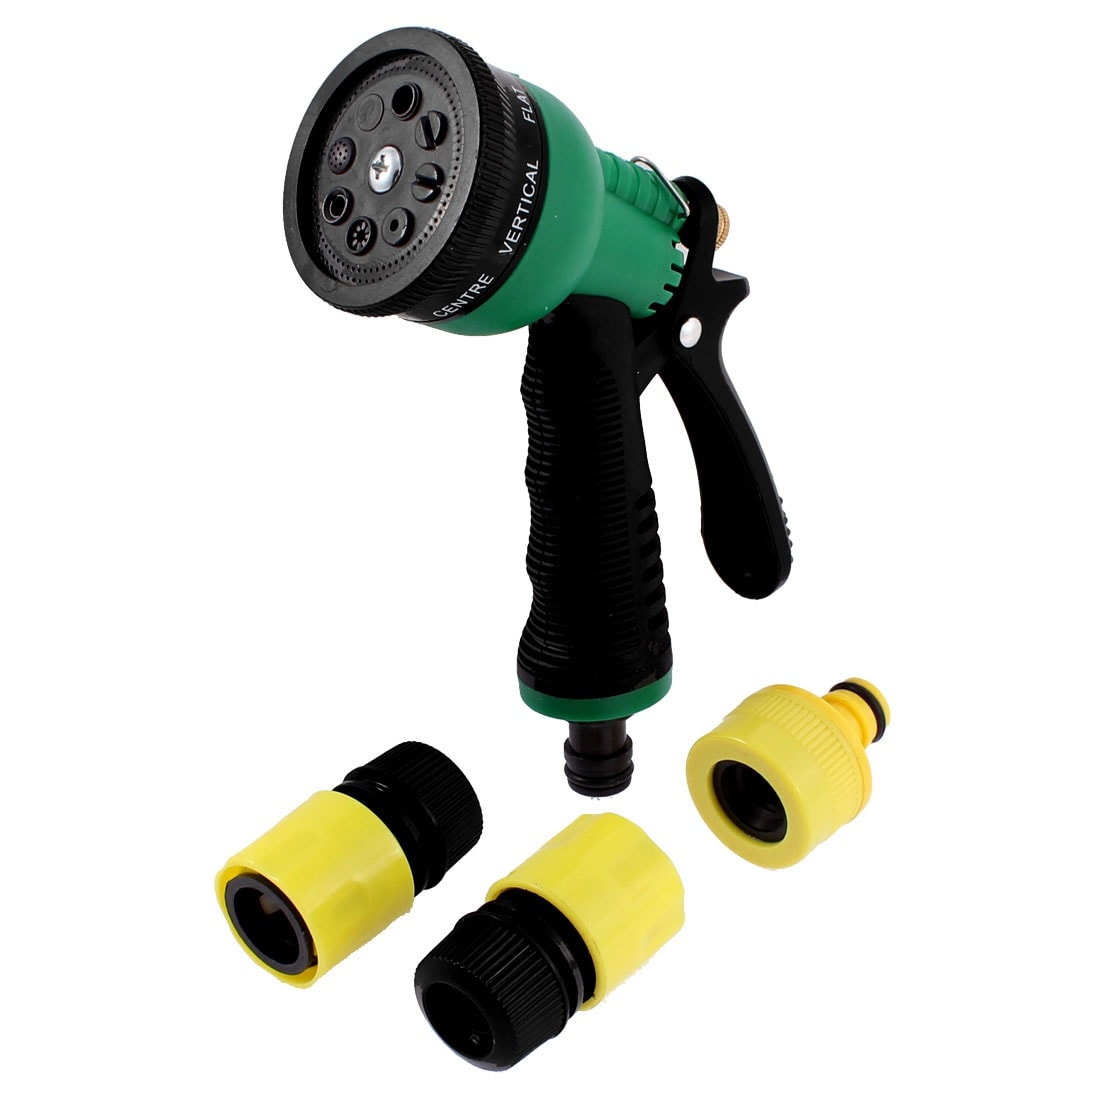 Garden Irrigation Cleaning Water Hose Squirt Sprayer Nozzle Connector - Green,Black,Yellow